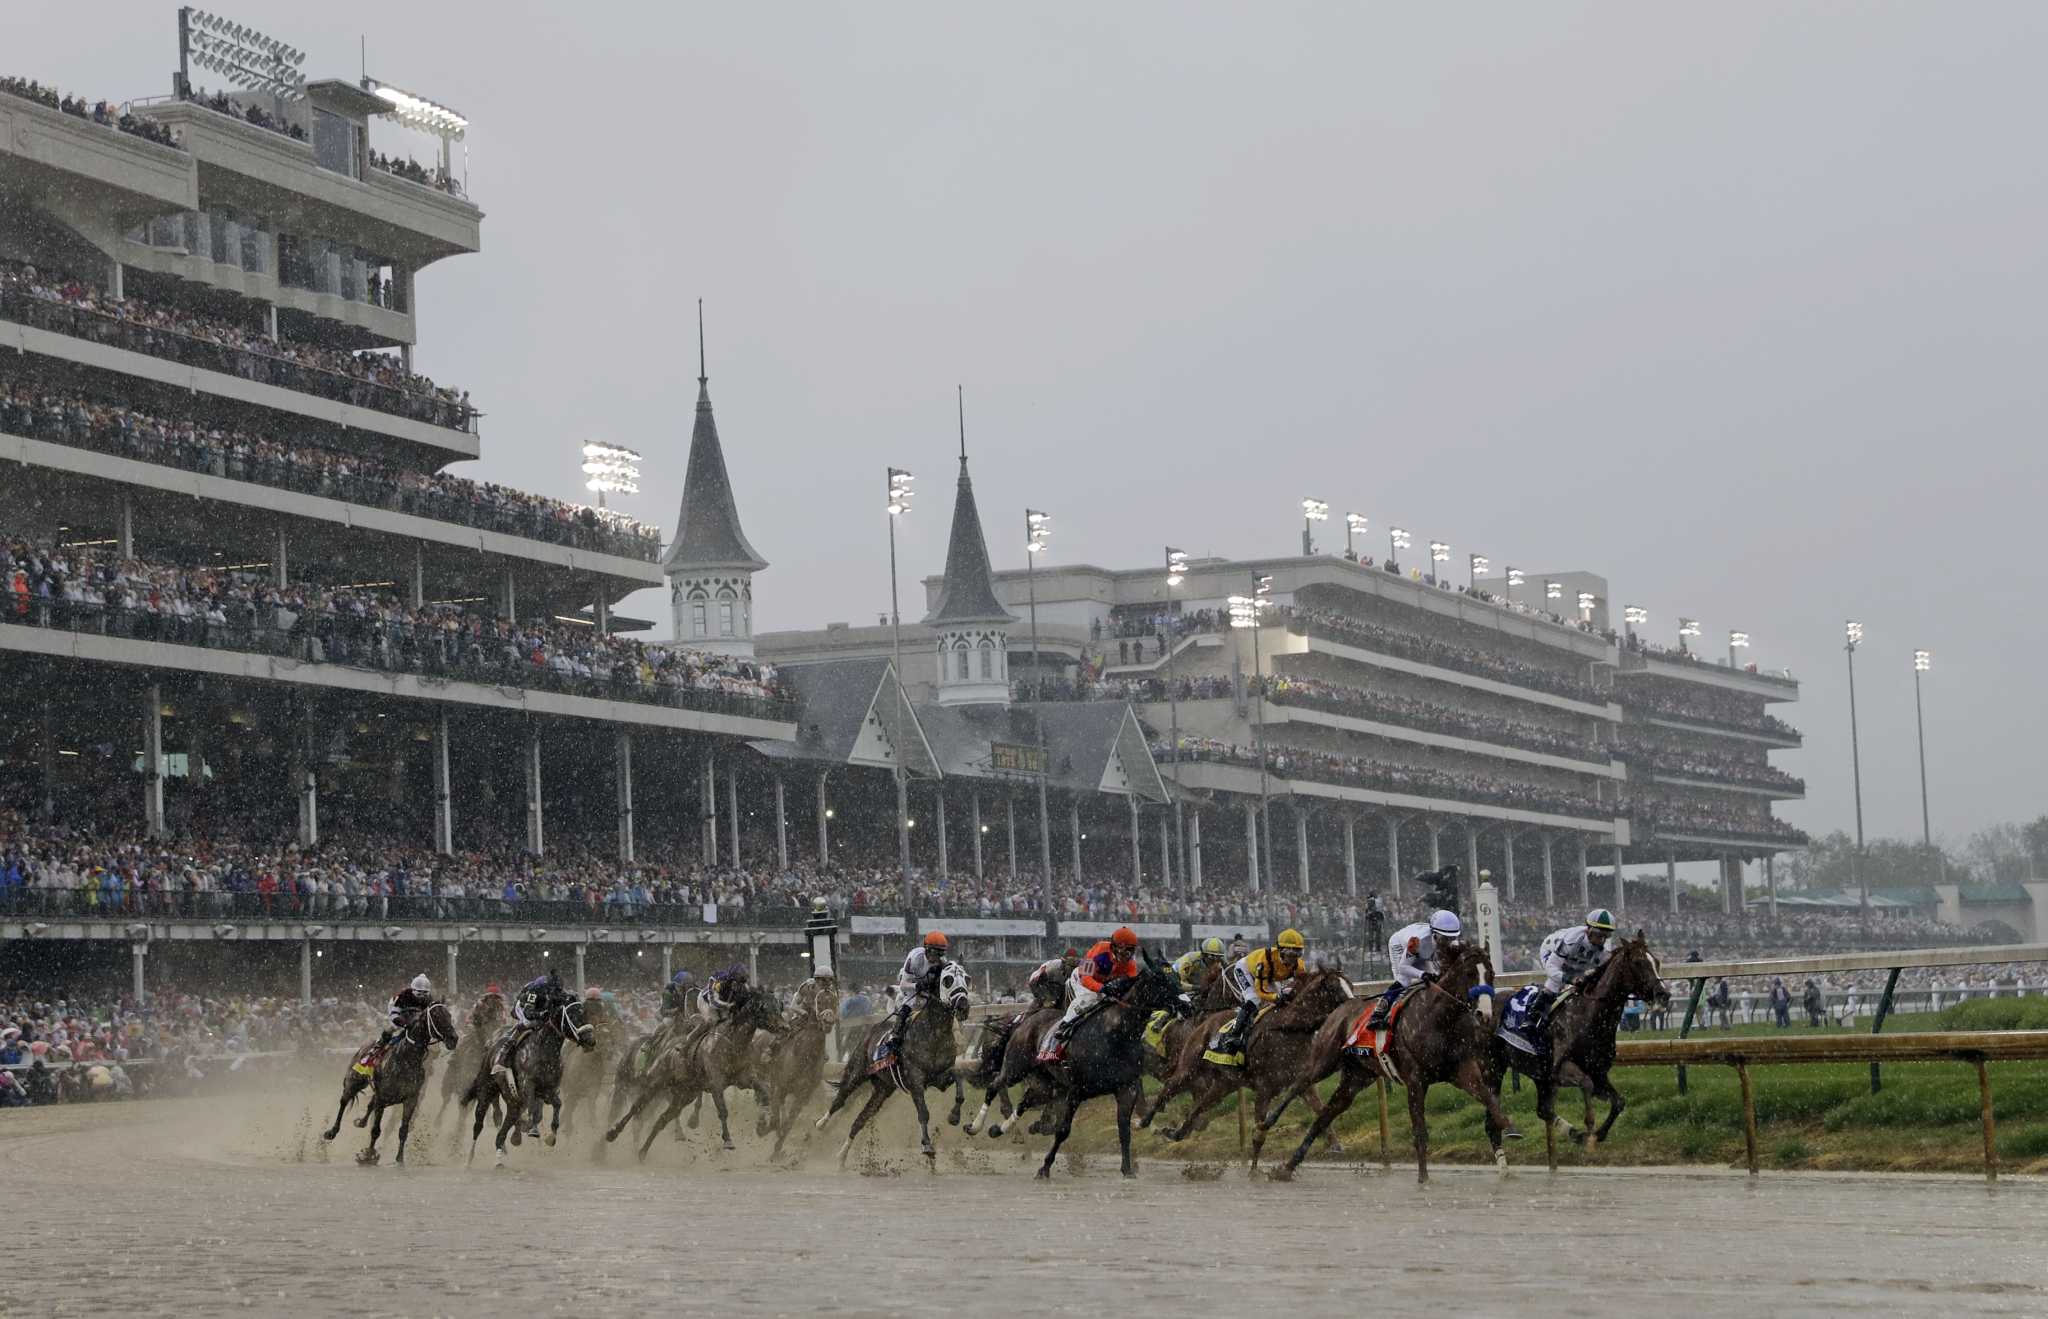 Kentucky Derby will run on Sept. 5, move could impact Saratoga racing